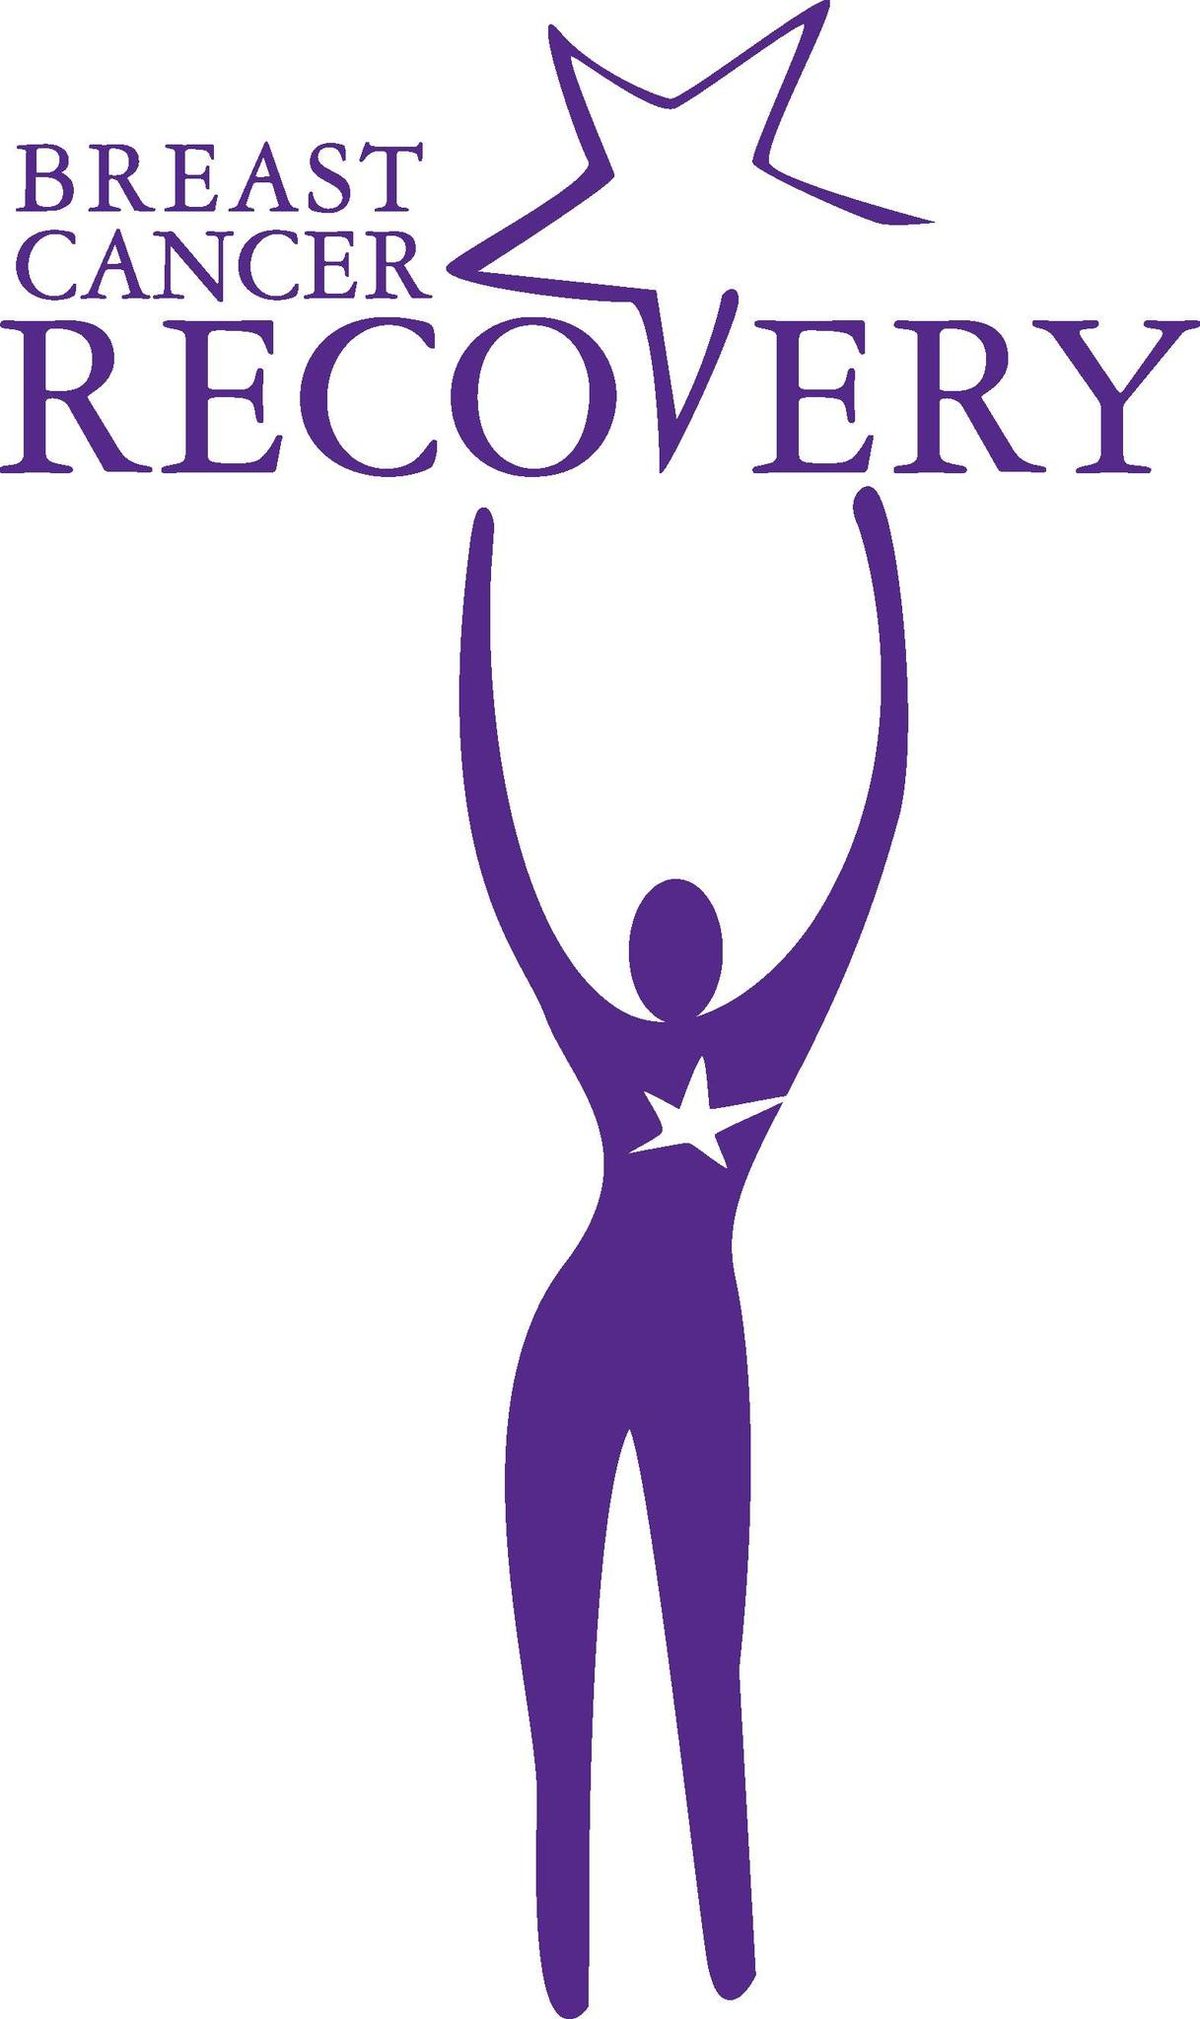 Breast Cancer Recovery Event